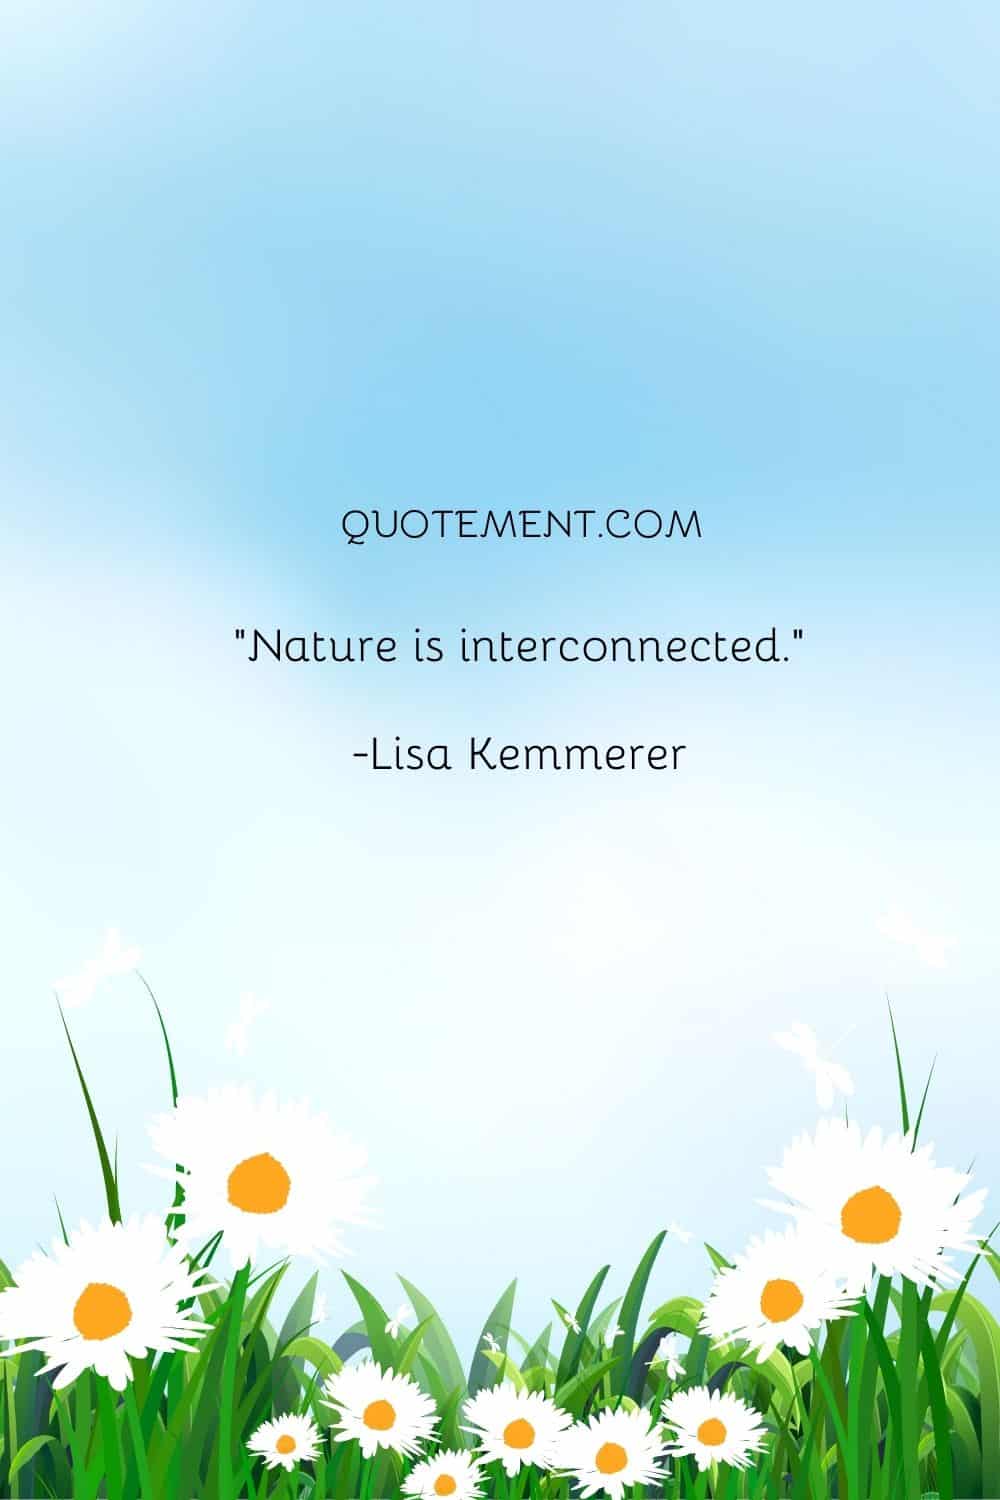 Nature is interconnected.